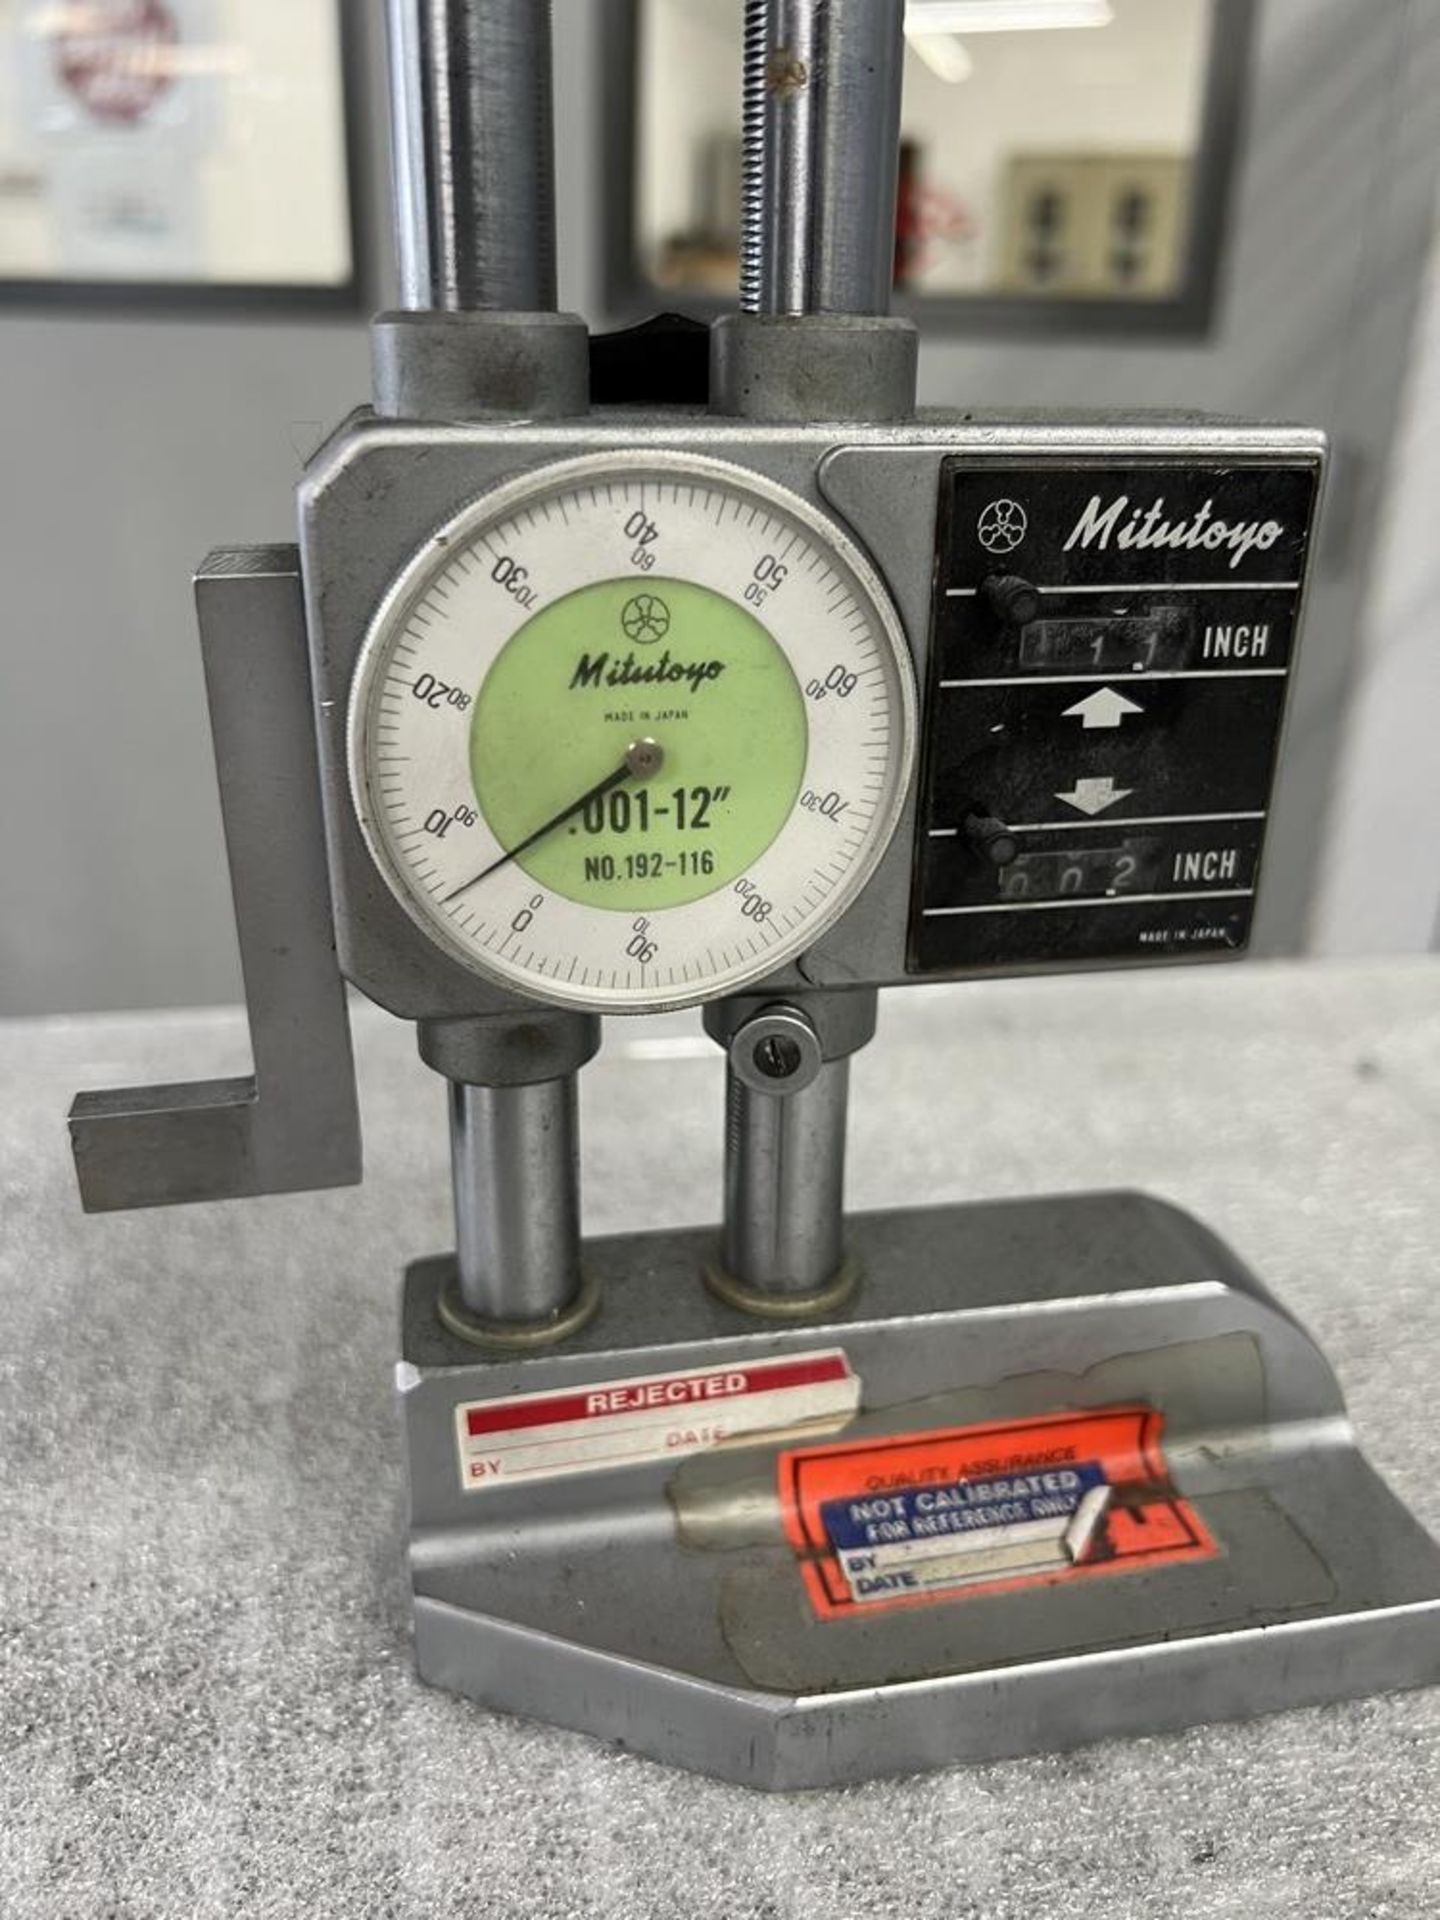 Mitutoyo 0-12" Precision Height Gage # 192-116 - Image 2 of 4